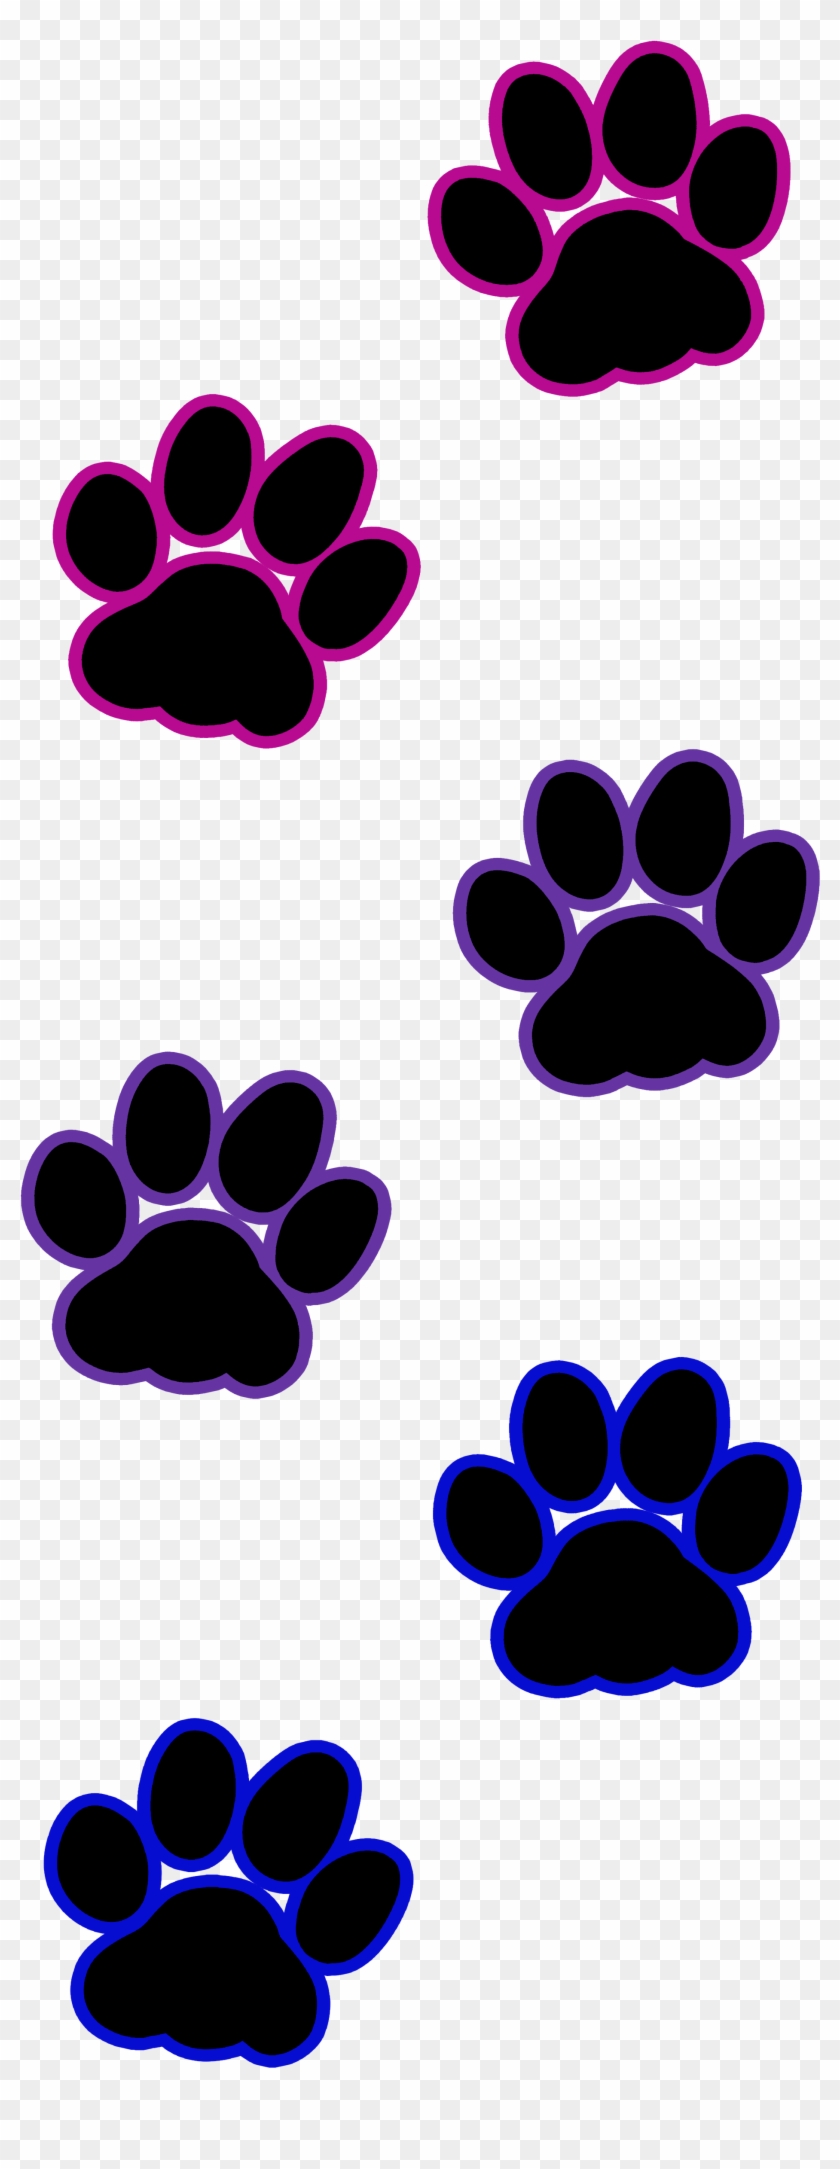 Cat Paws Png #235977